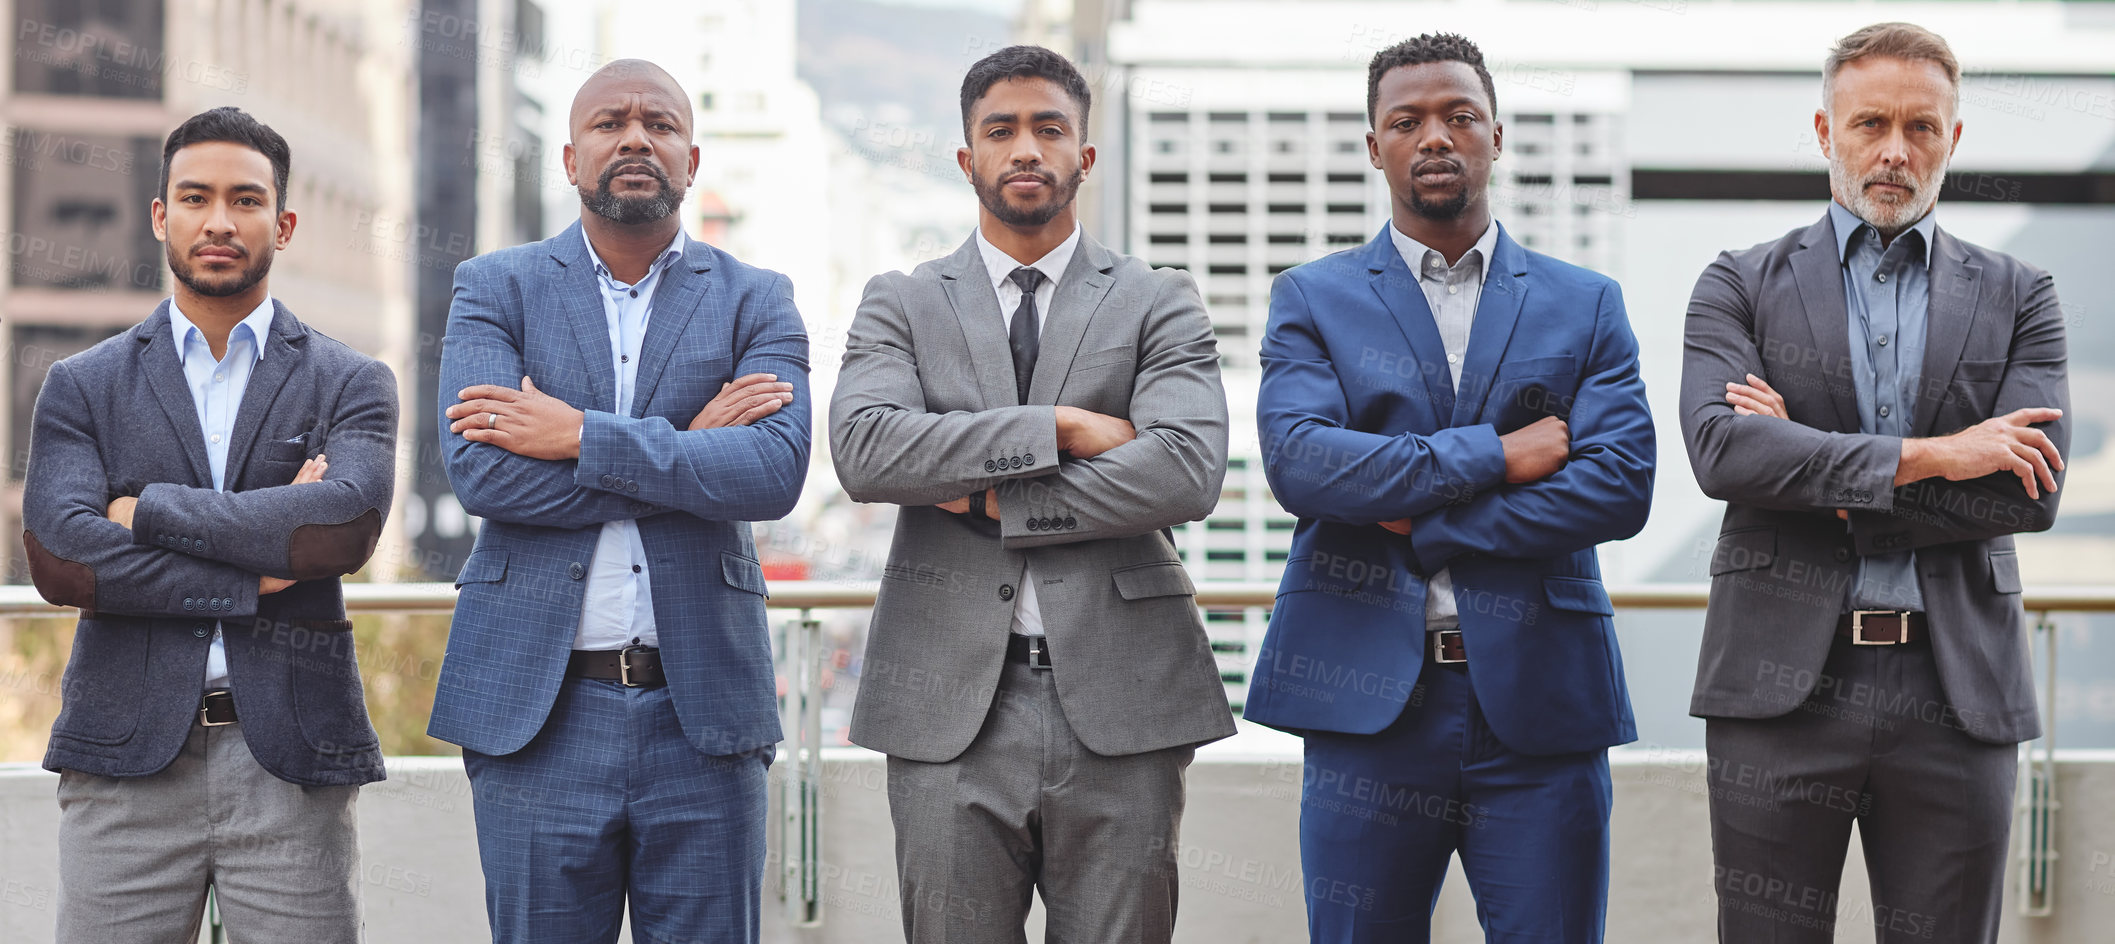 Buy stock photo Portrait of businessmen with arms folded looking ready and confident outside